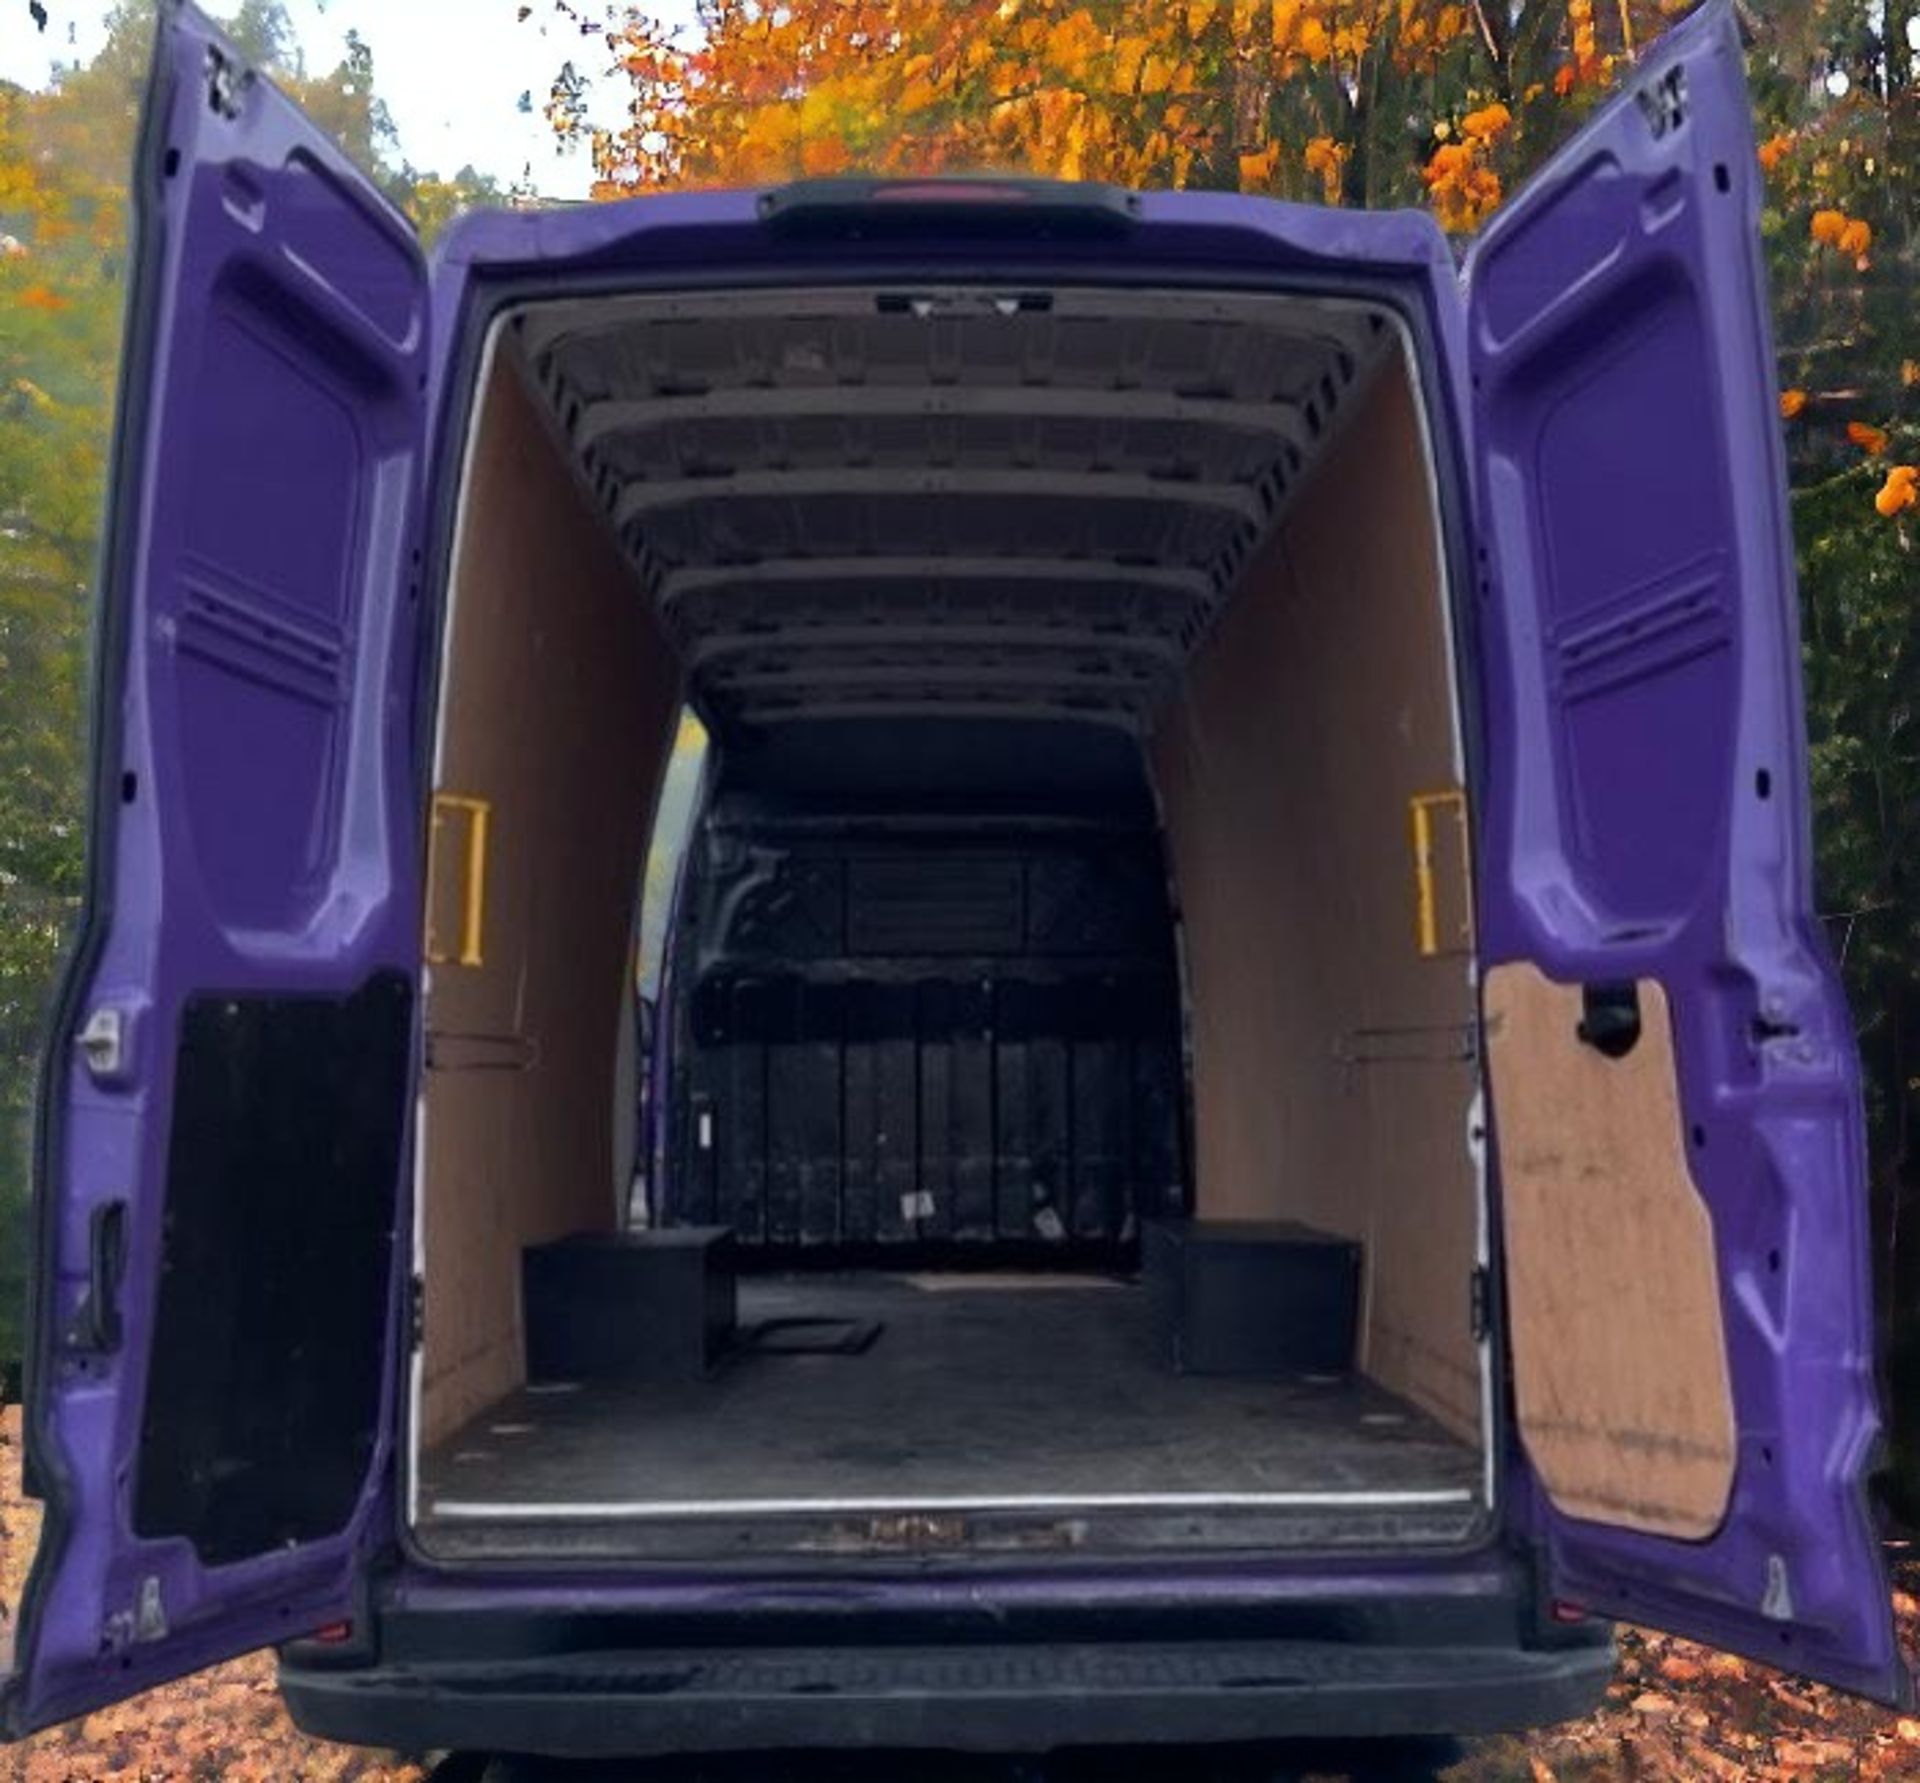 2015 IVECO DAILY 50C17 EXTRA LONG WHEEL BASE PANEL VAN - Image 4 of 18